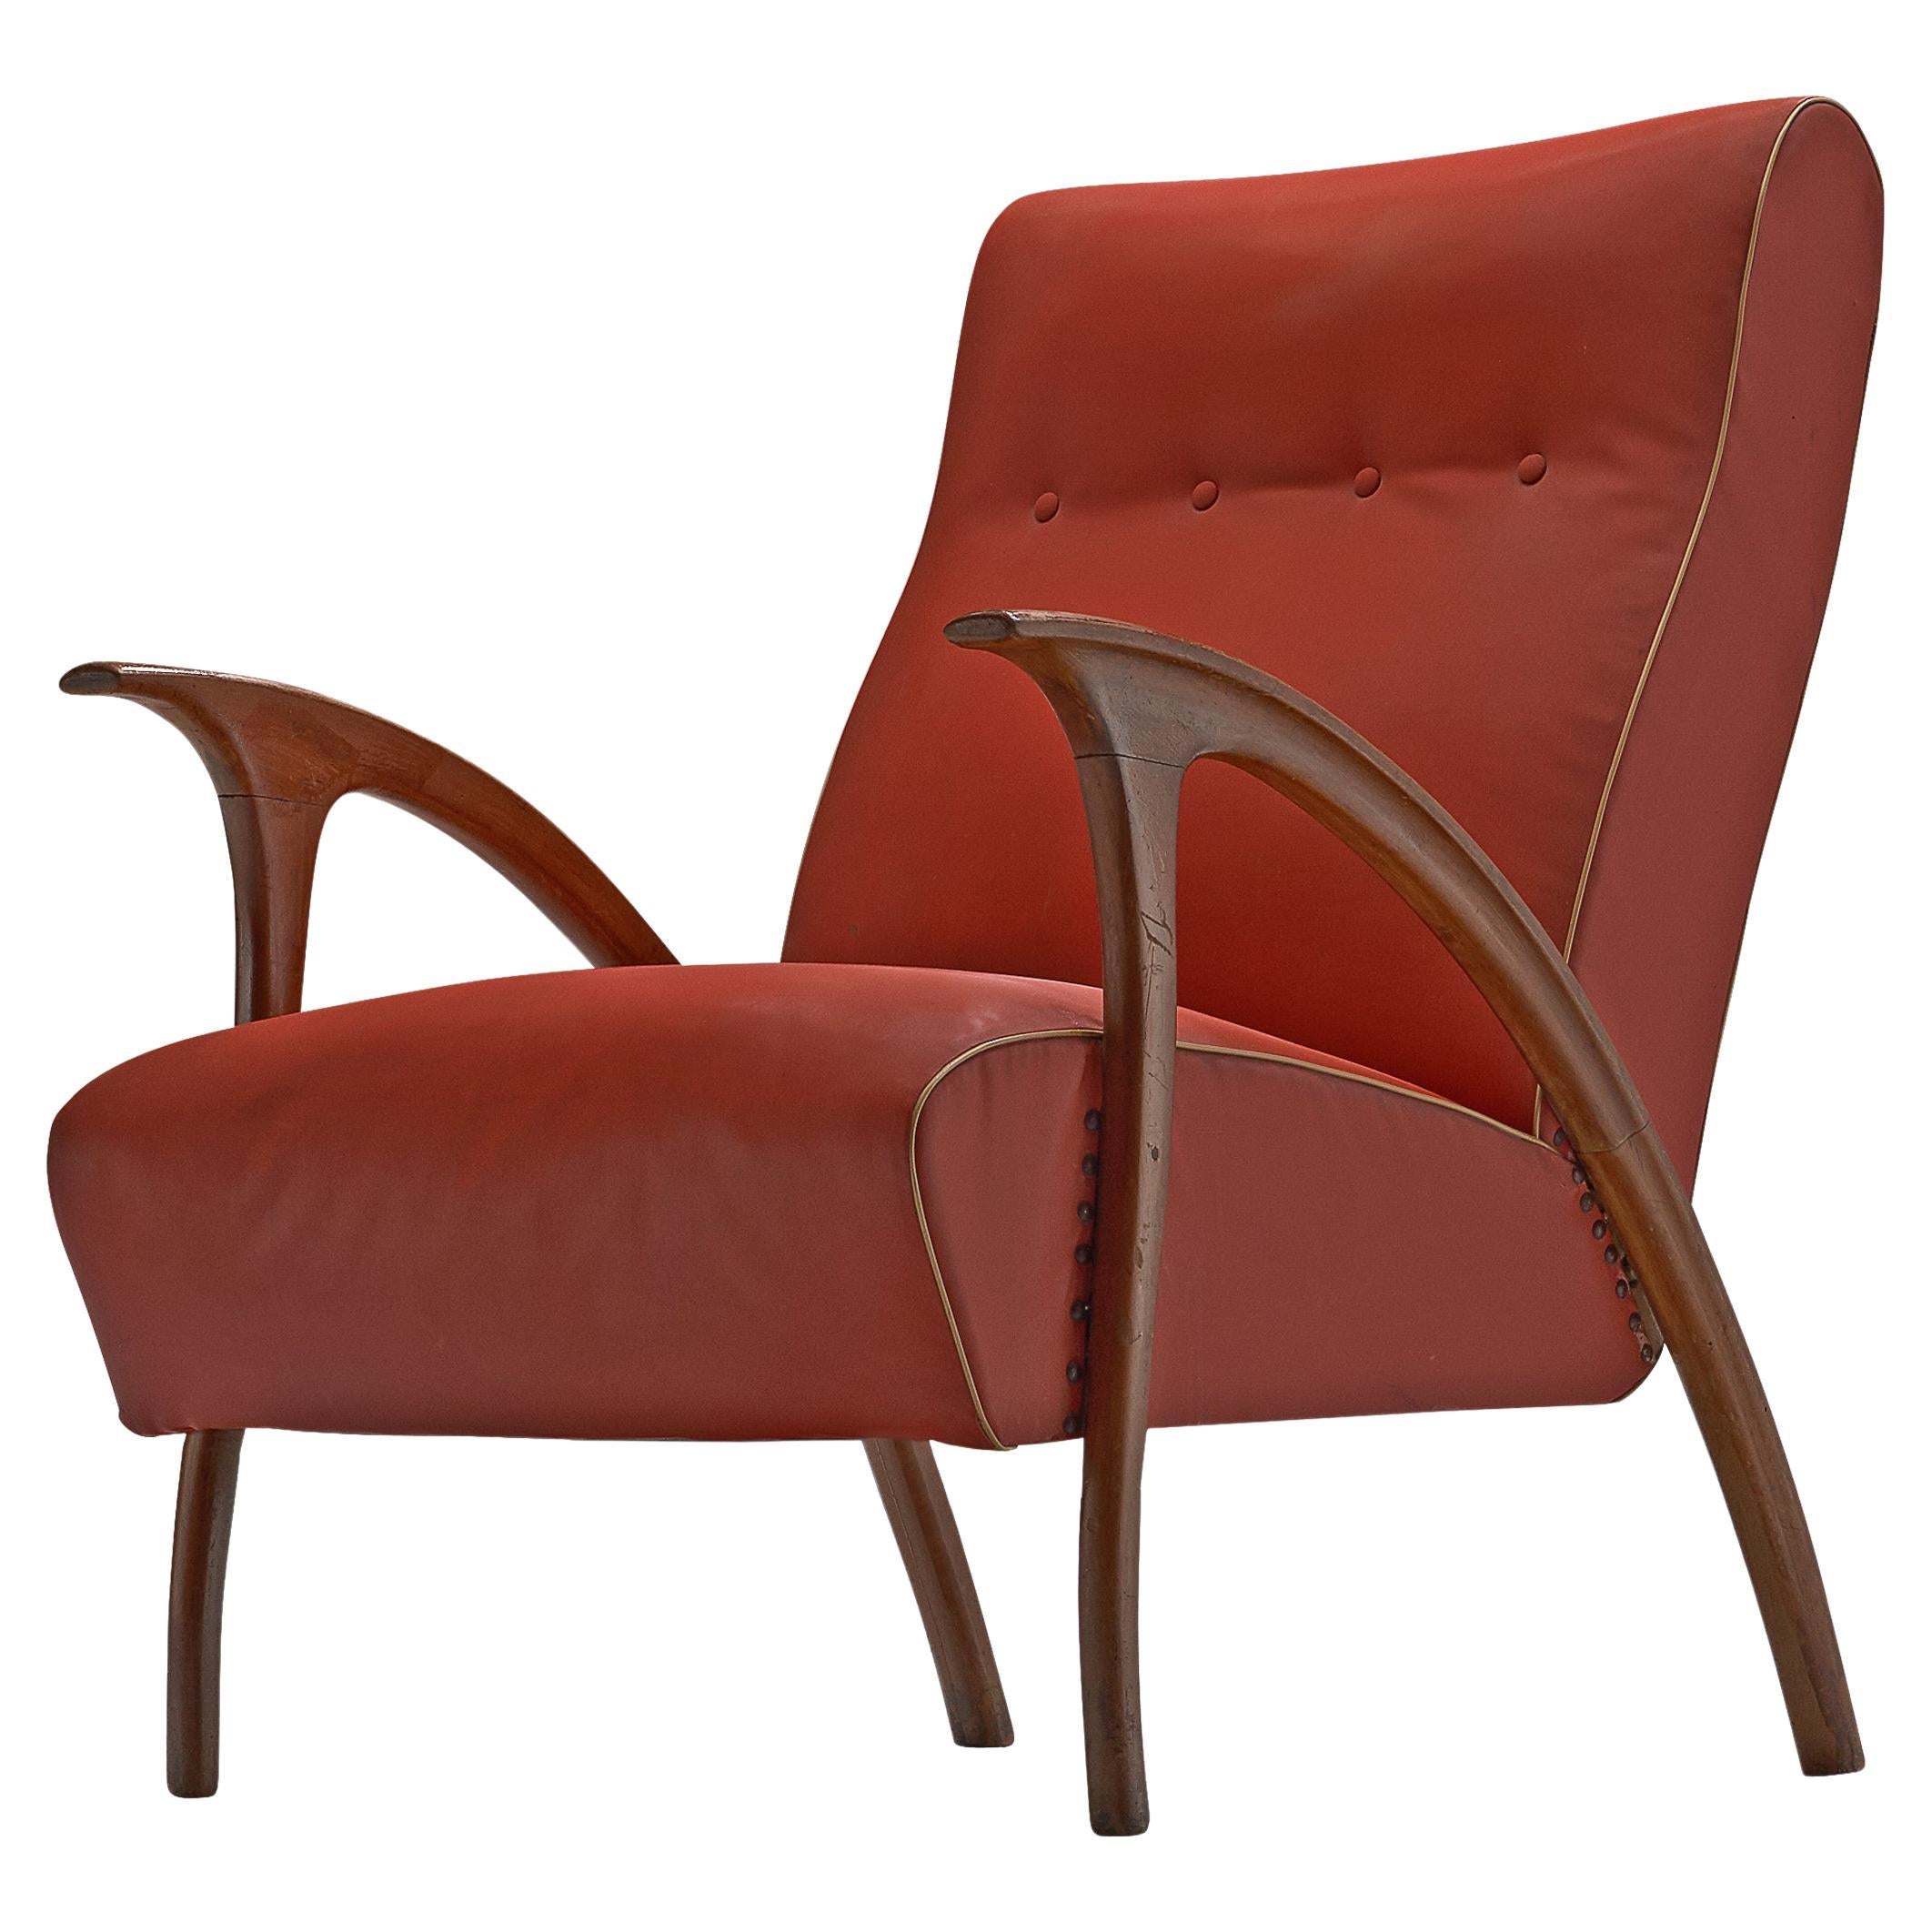 Mid-Century Modern Italian Lounge Chair in Walnut and Red Upholstery 